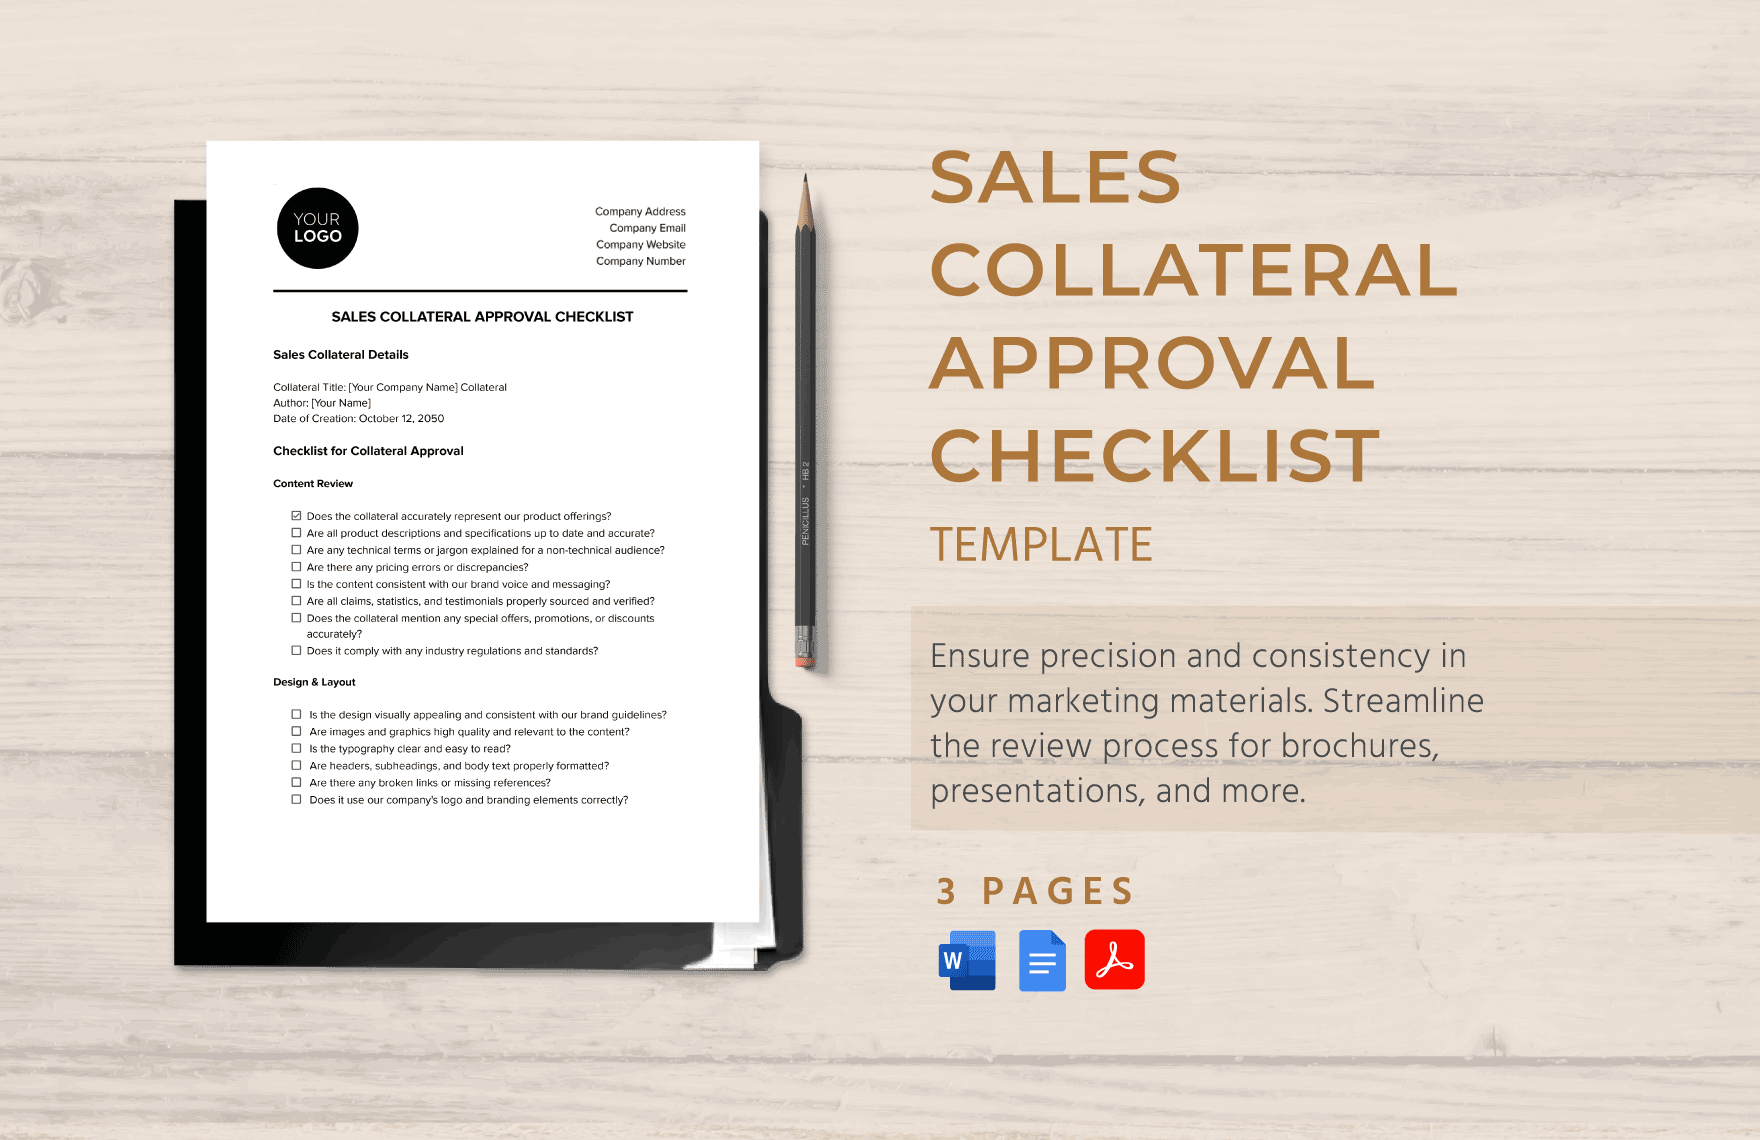 Sales Collateral Approval Checklist Template